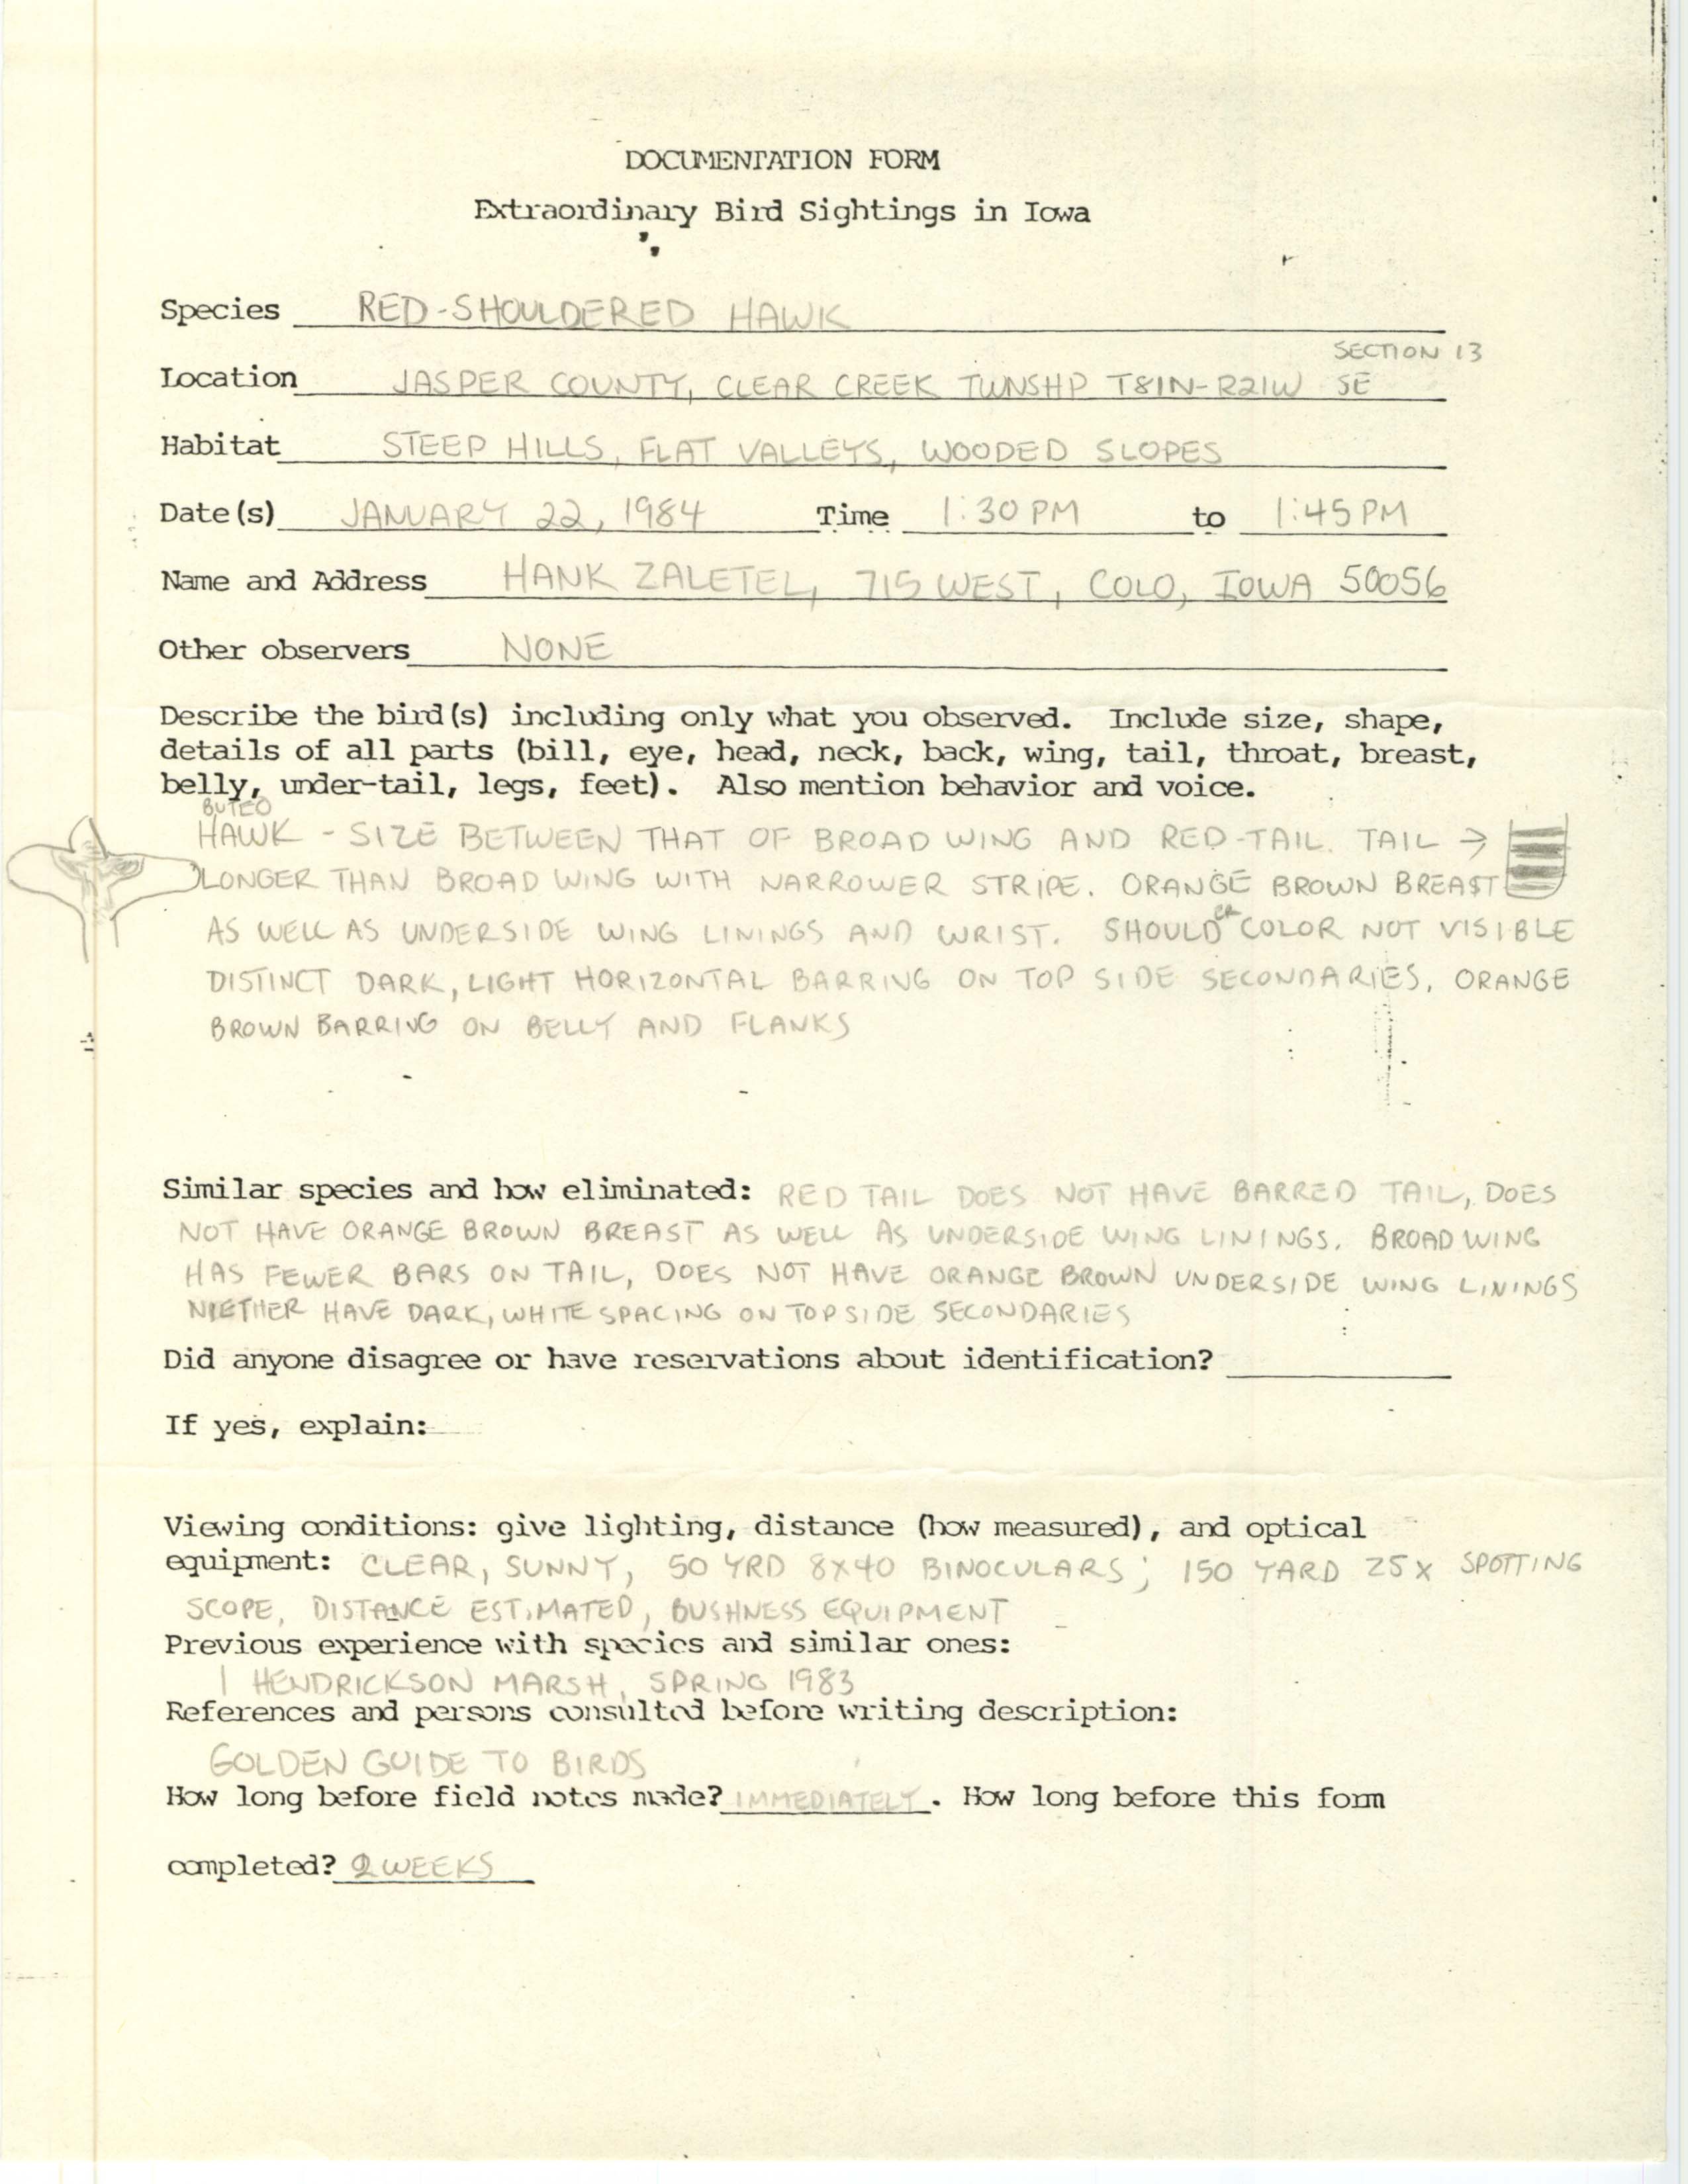 Rare bird documentation form for Red-shouldered Hawk at Clear Creek Township in Jasper County, 1984